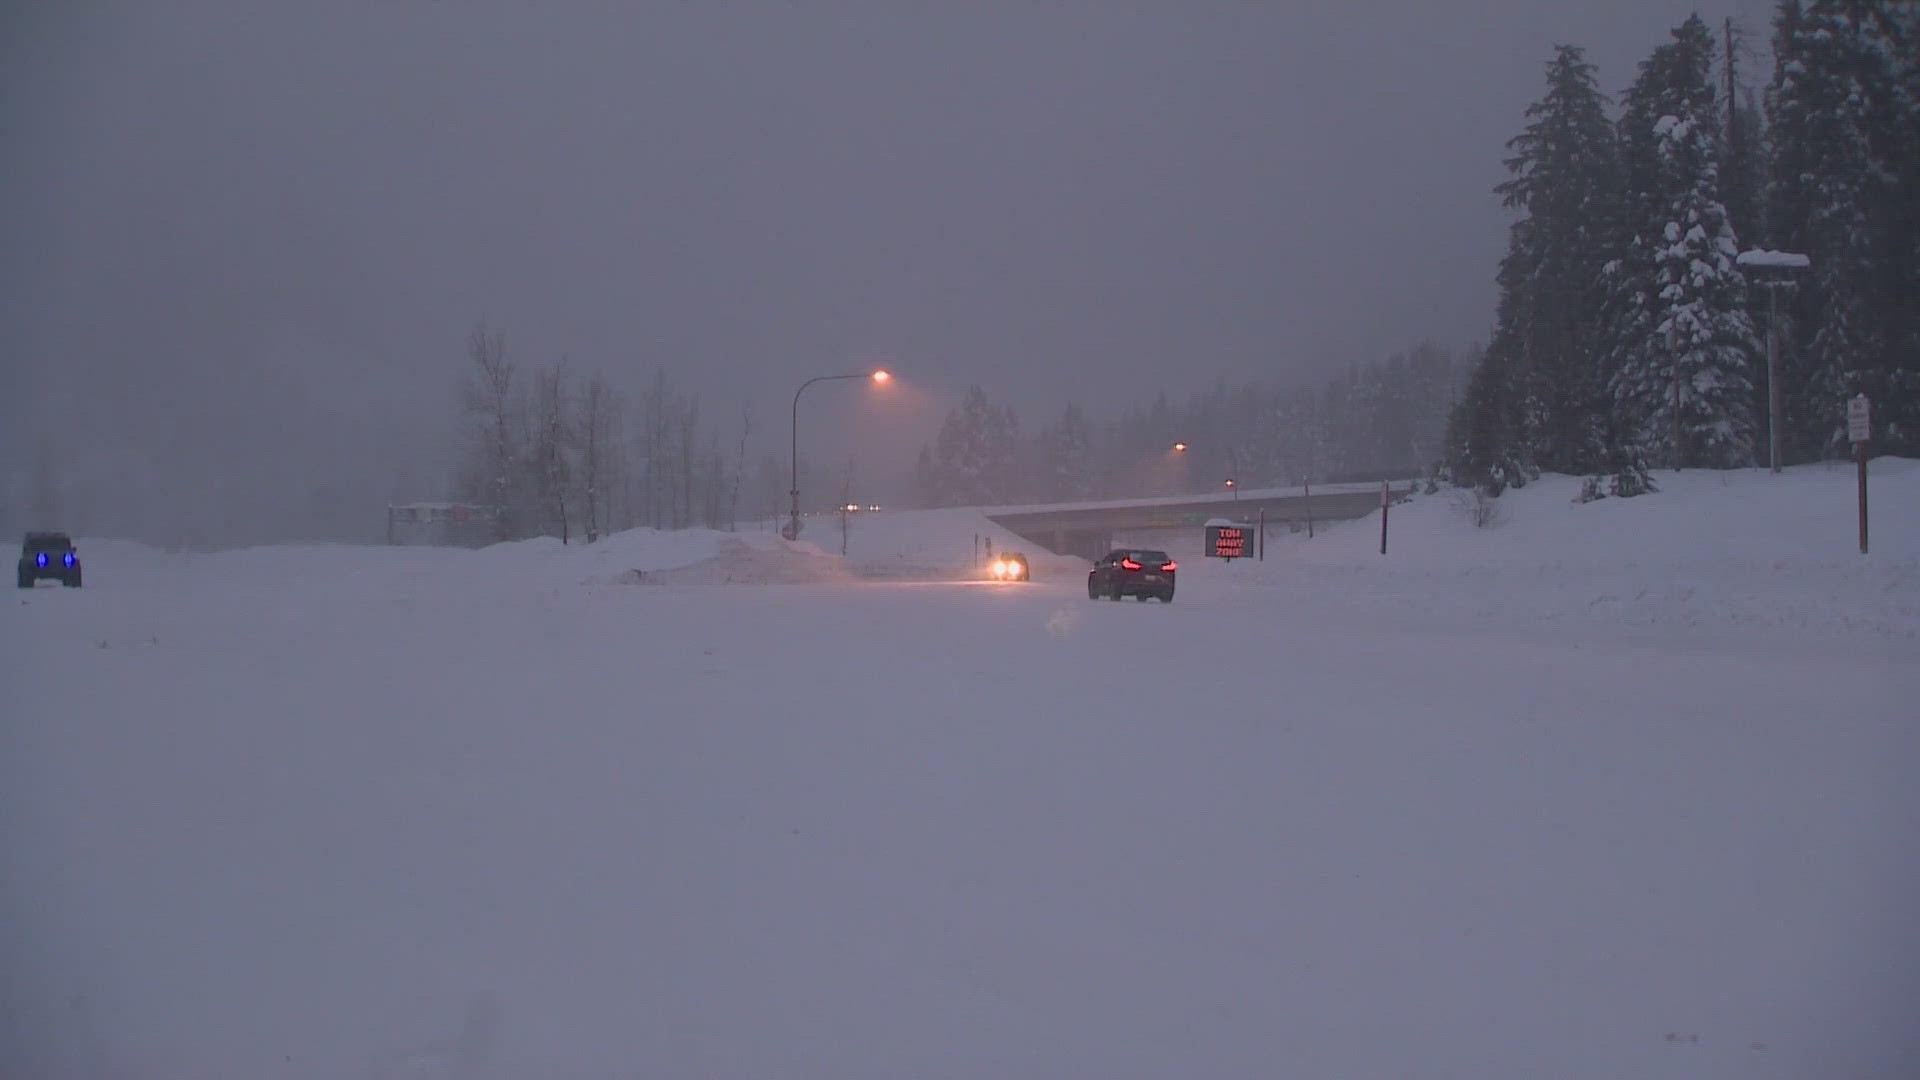 The National Weather Service is asking people planning to travel over the Cascades to prepare now for dangerous travel conditions or change their plans completely.